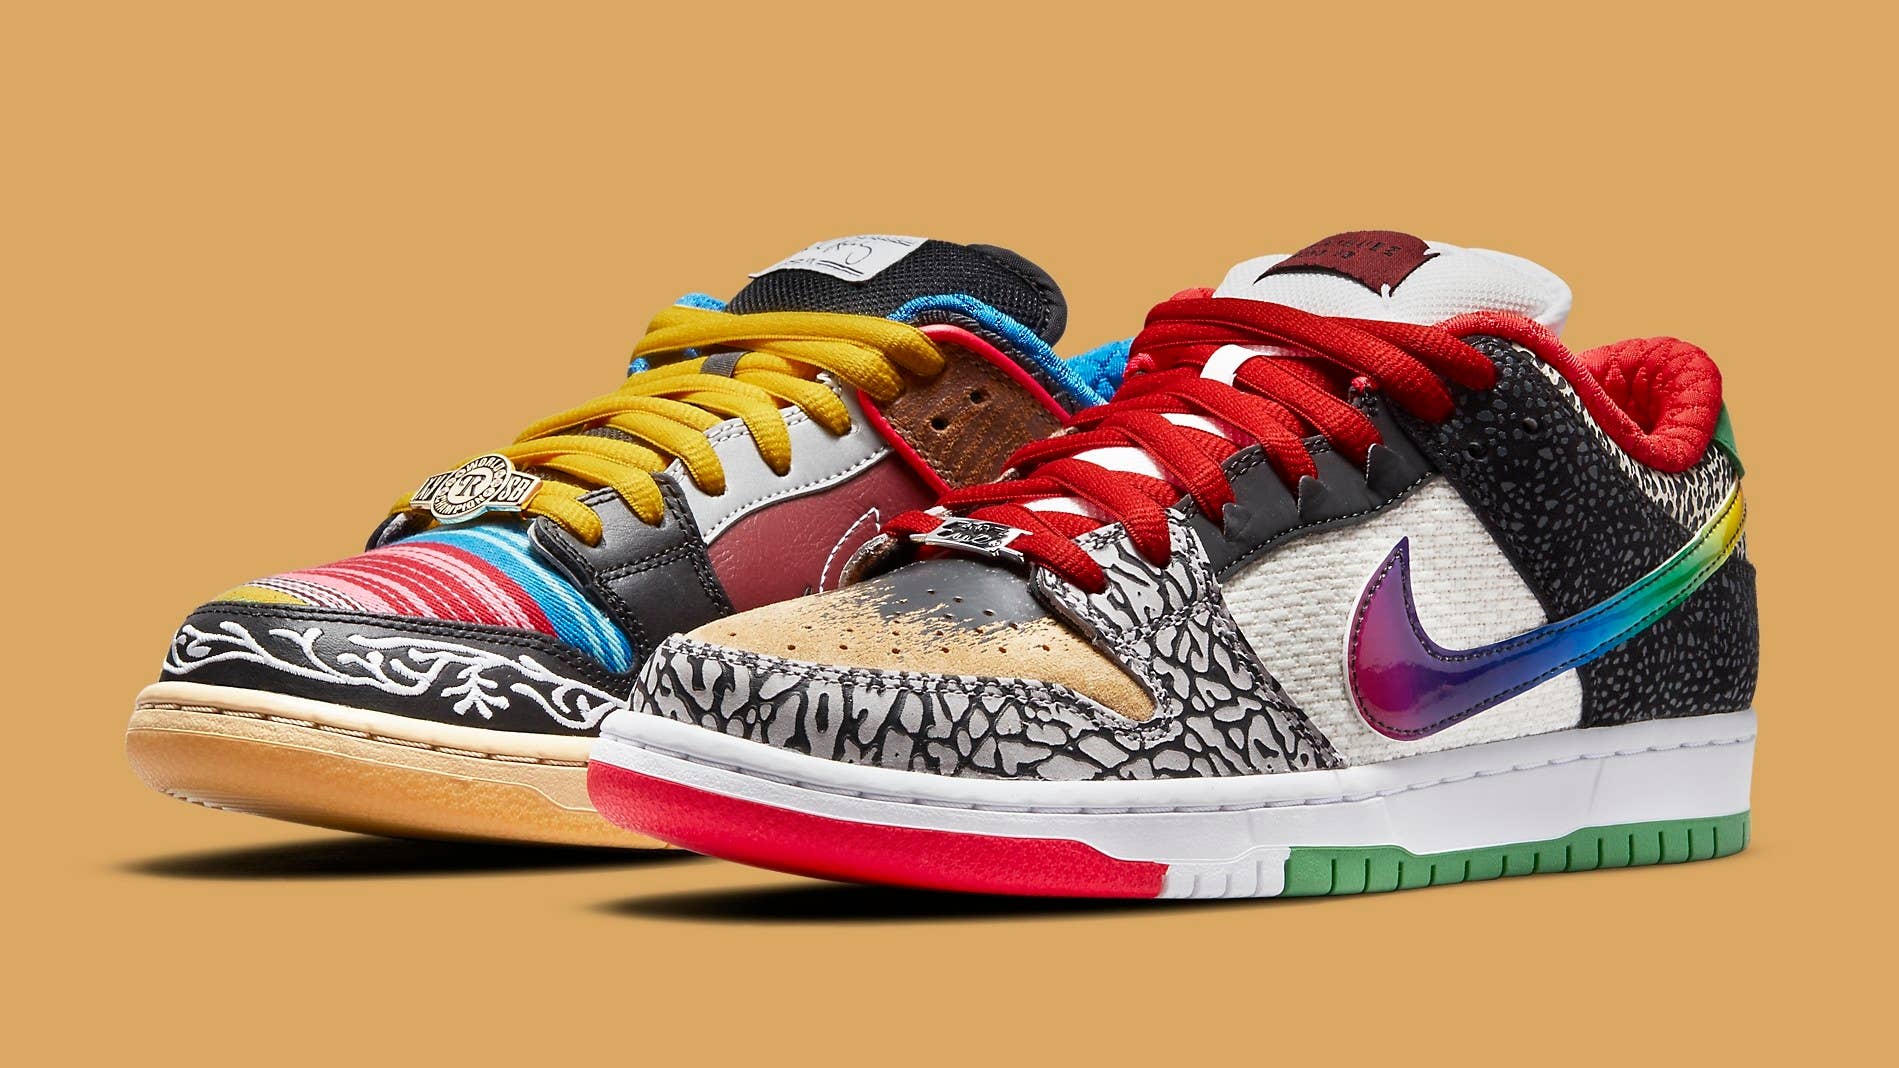 Nike SB Dunk Low 'What The Paul' CZ2239-600 Pair